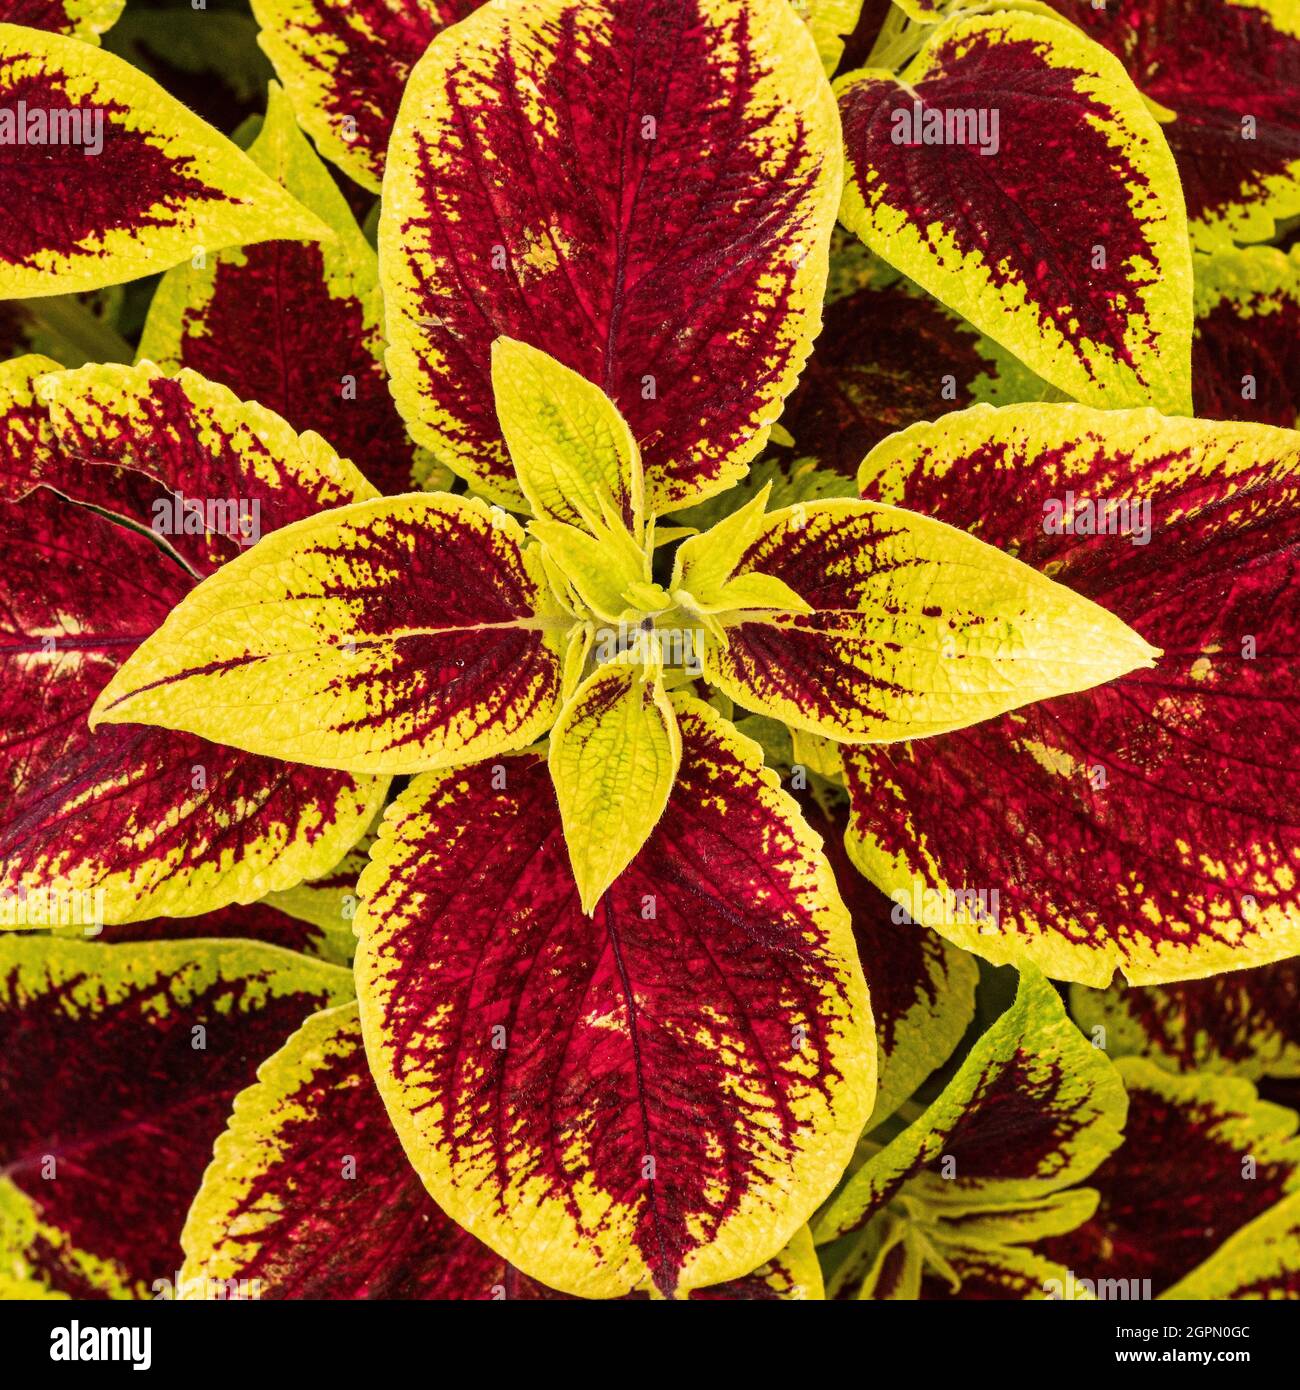 A close up of the deep red and yellow foliage of a Coleus plant Stock Photo